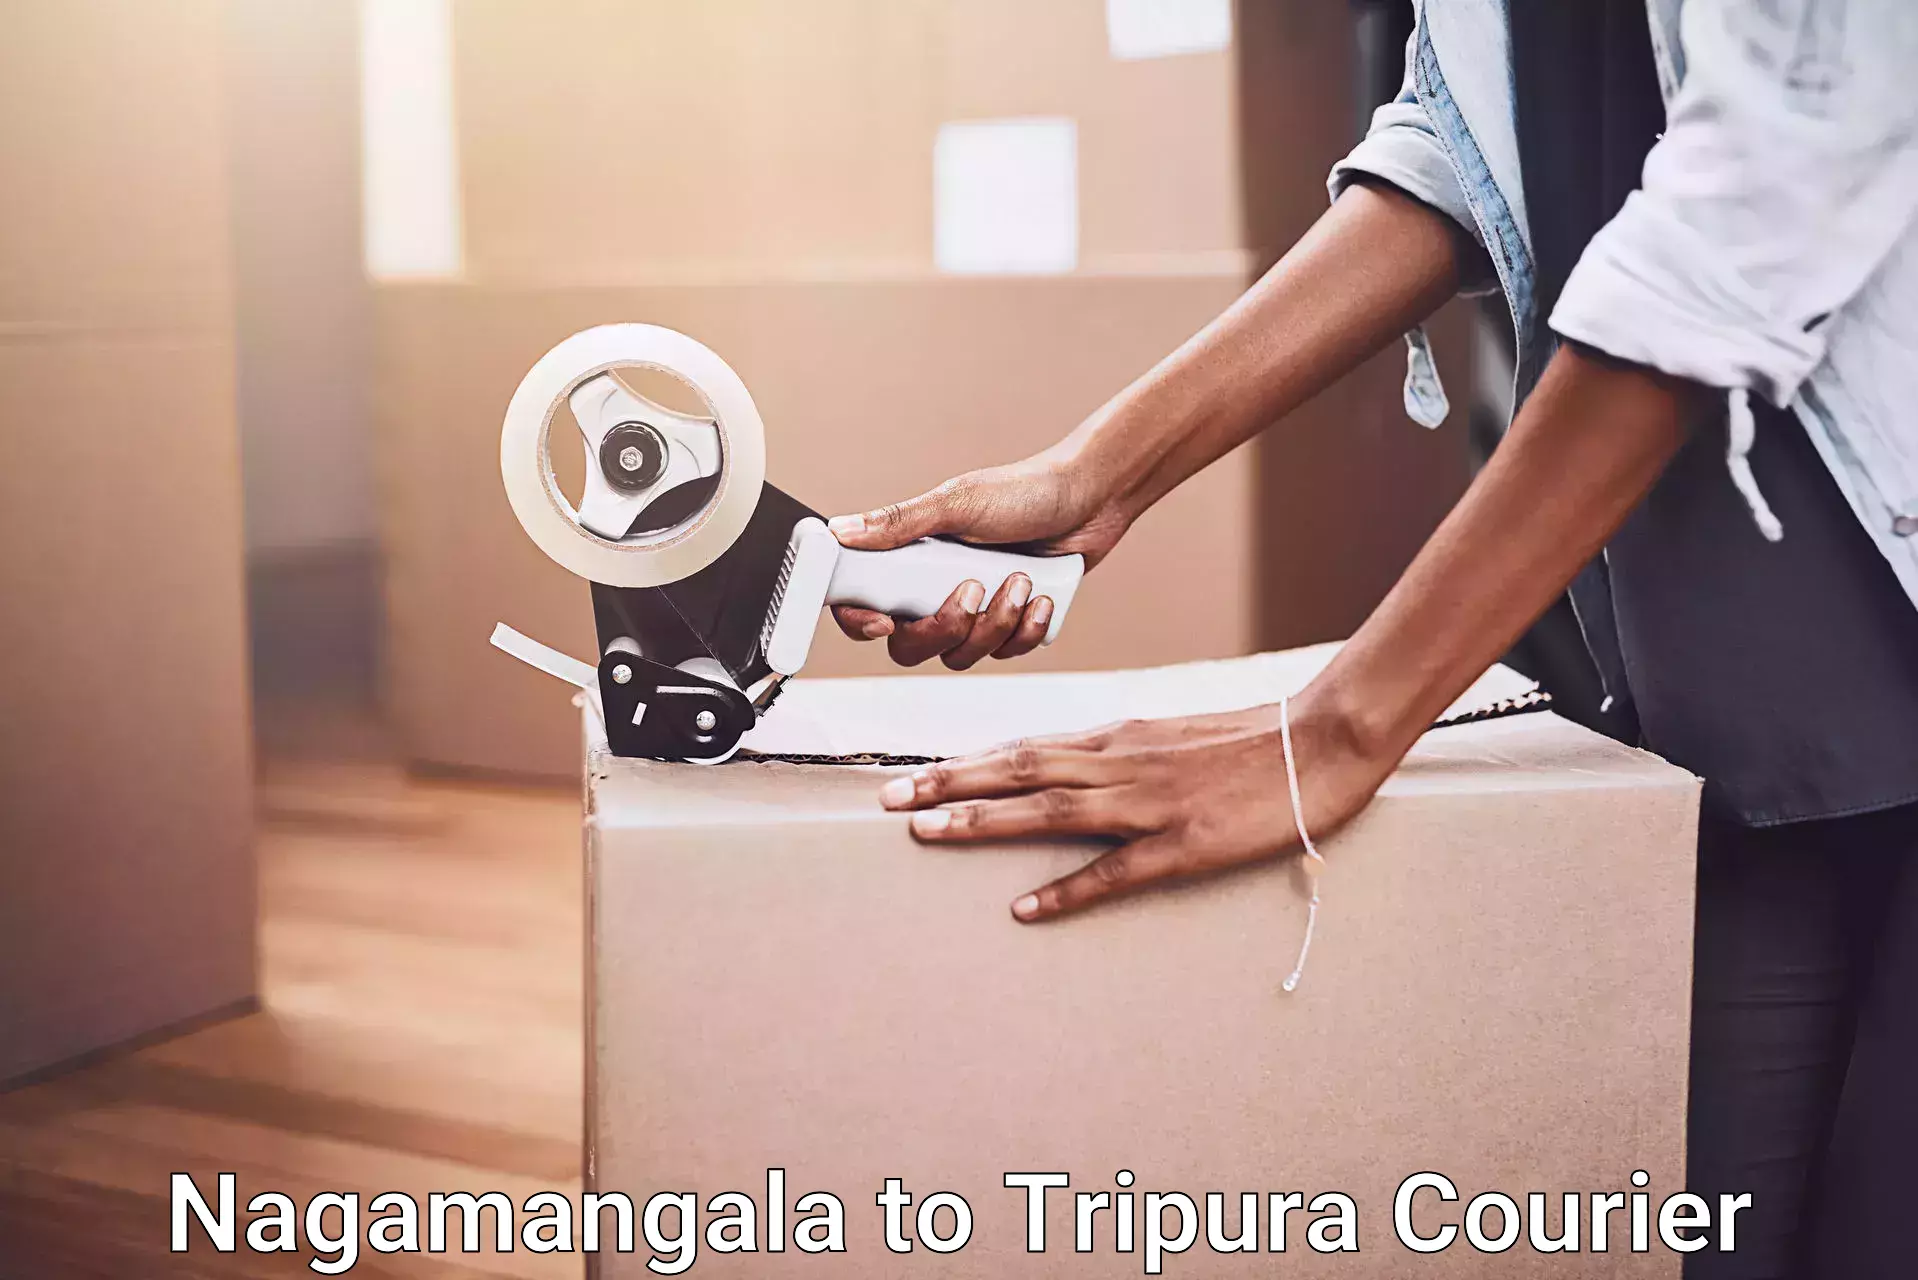 Moving and storage services in Nagamangala to Udaipur Tripura